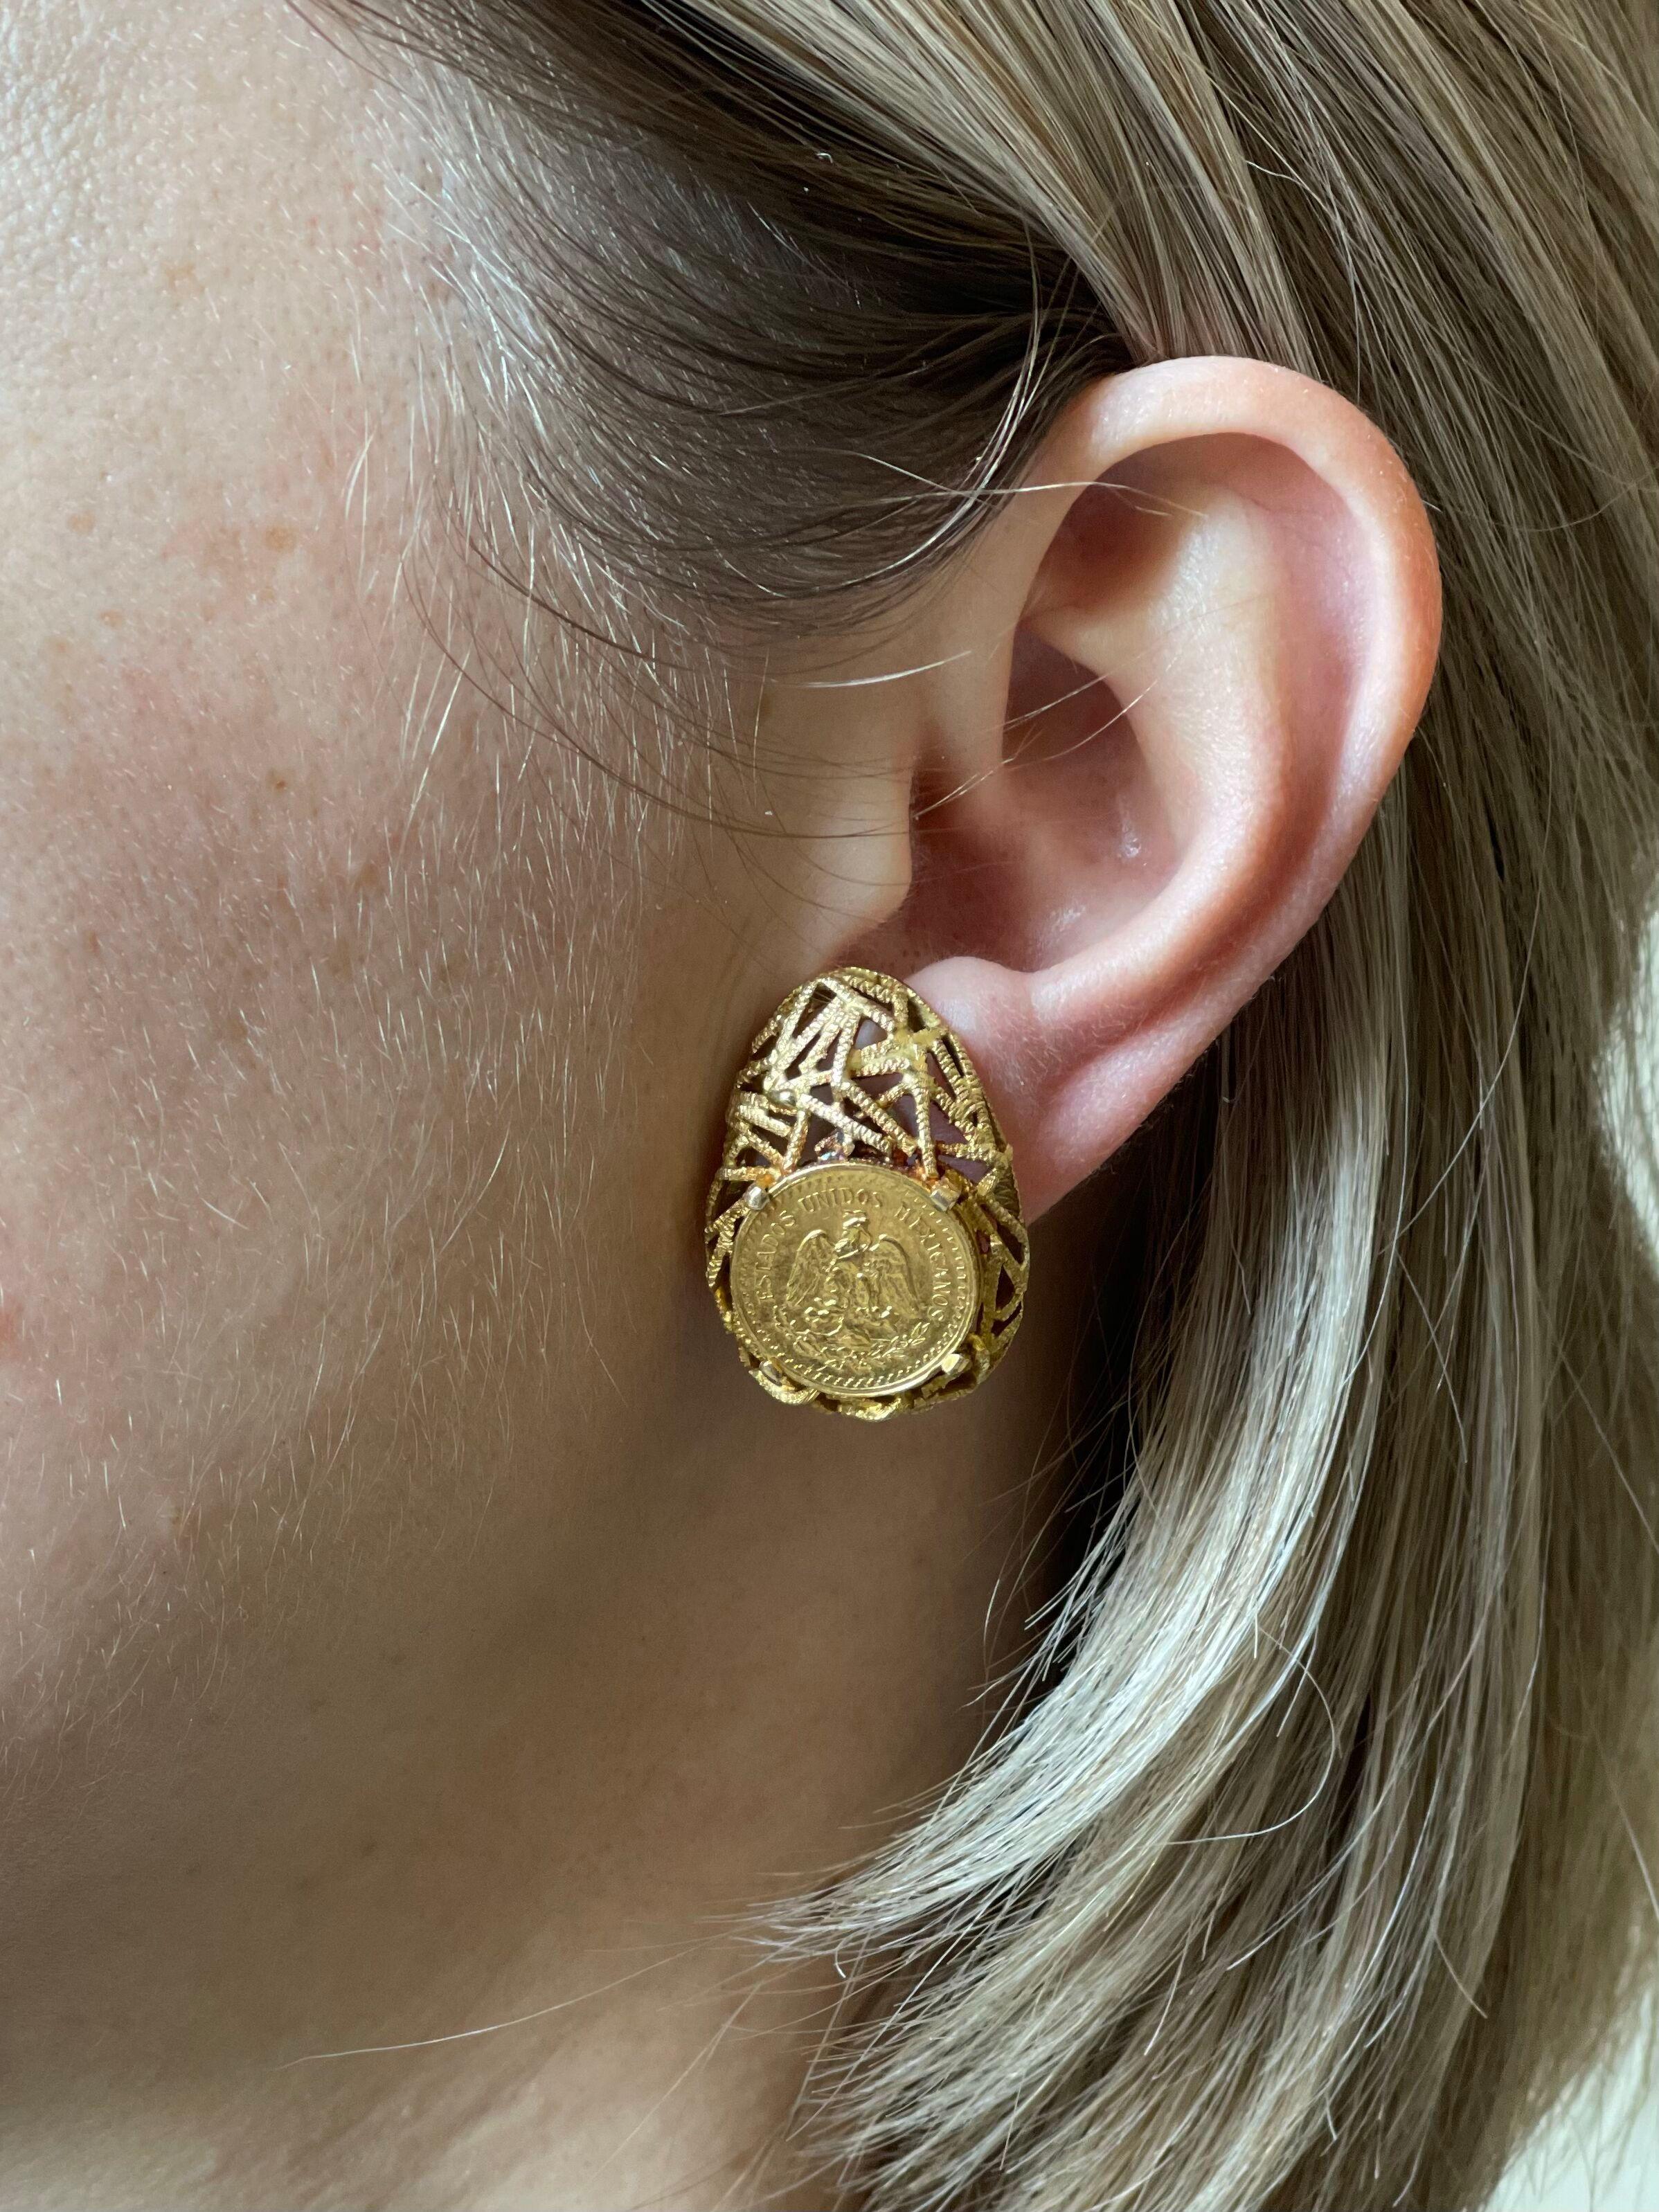 Pair of vintage 1970s 18k gold earrings, featuring center gold coins and sticks designer. Measure 1 1/8